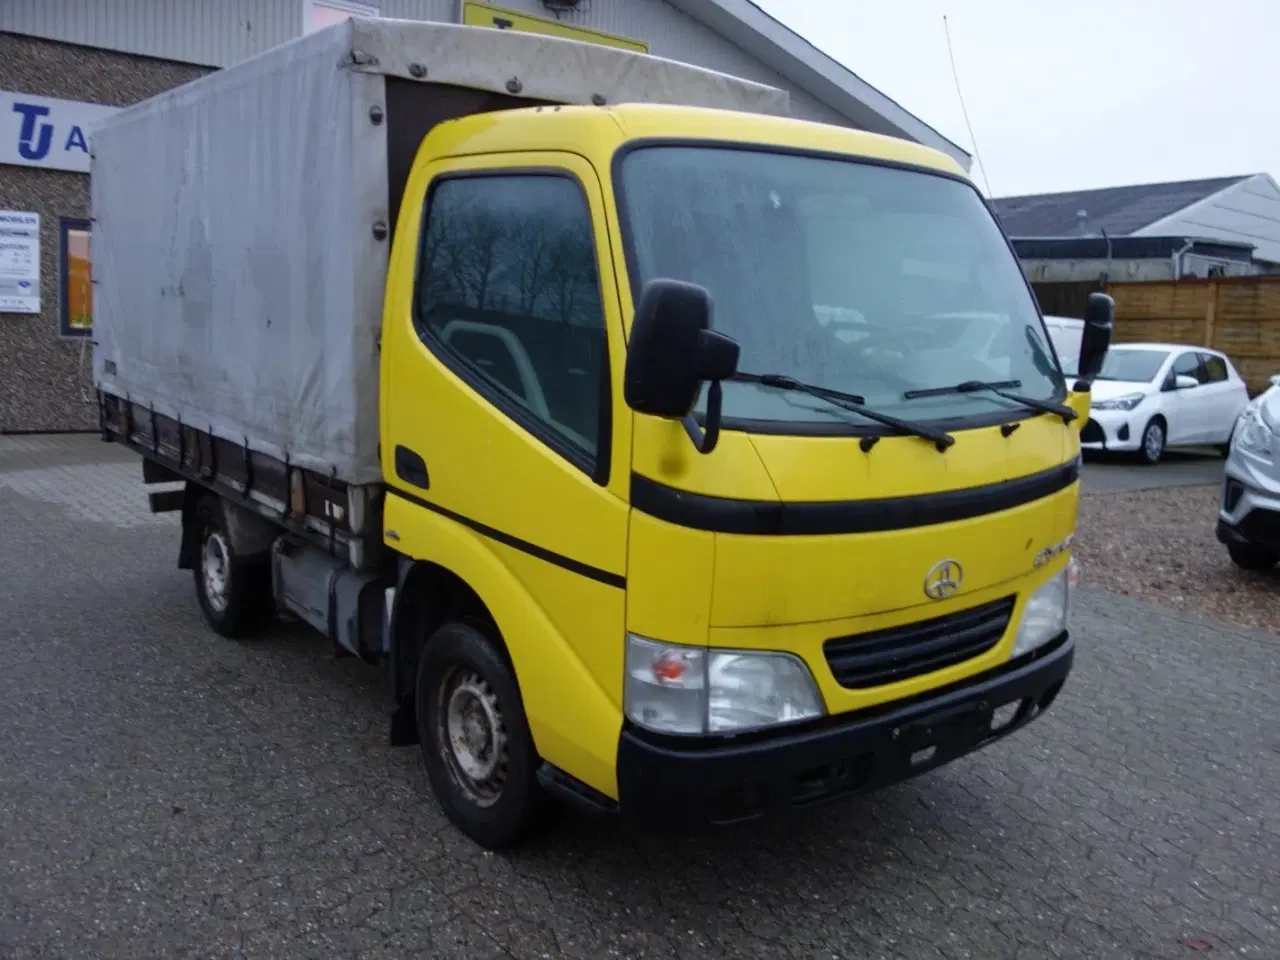 Billede 1 - Toyota Dyna 100 2,5 D-4D S.Kab Chassis